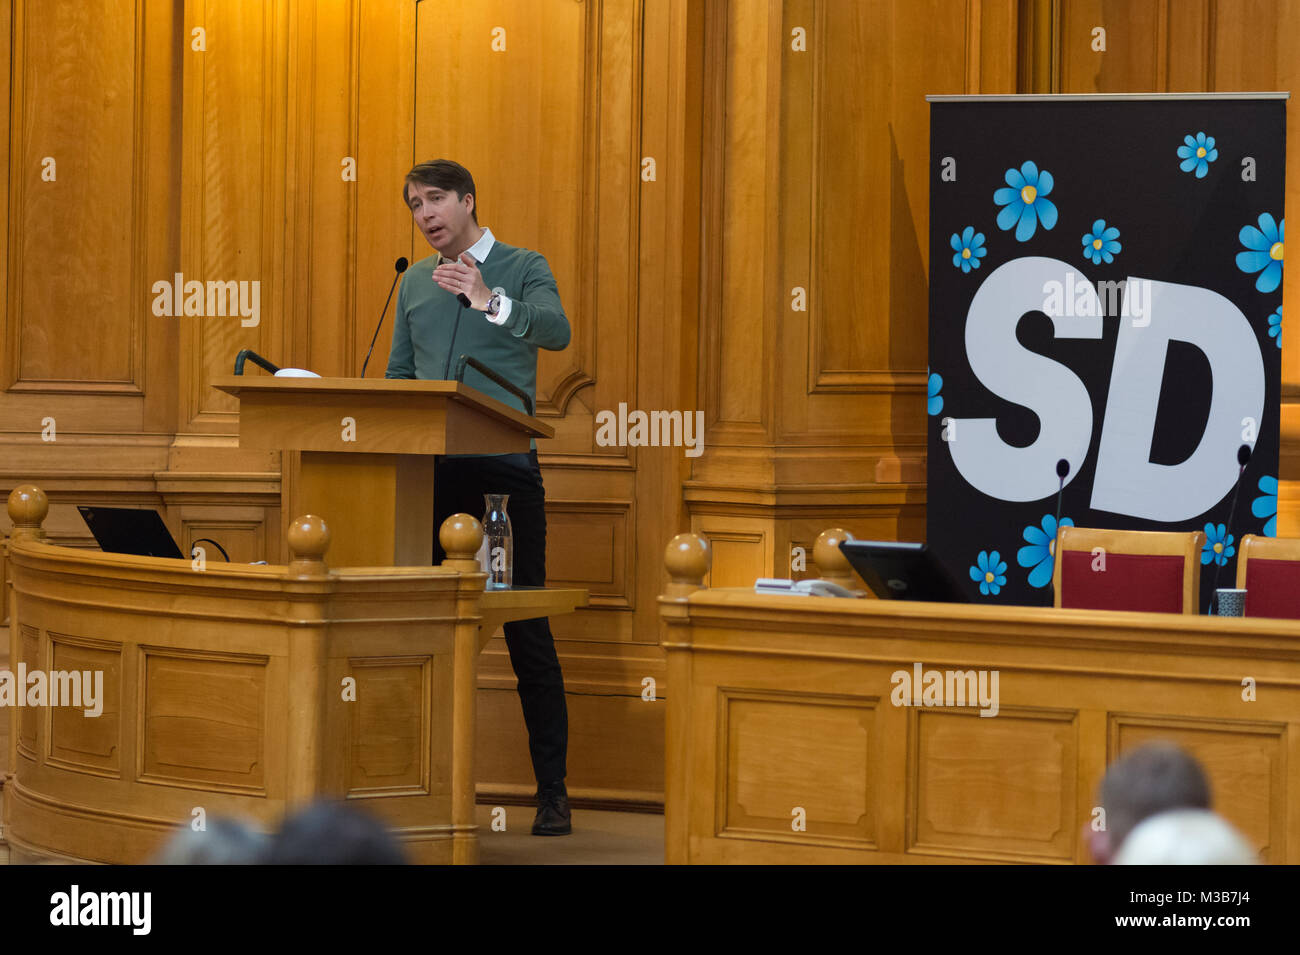 Stockholm, Sweden, 10th February, 2018. 'Future Conference' Sweden Democrats (SD) (Sverigedemokraterna) at the House of Parliament, Stockholm. Party Secretary Richard Jomshof informs about the election movement and about the party's organizational development. Stock Photo